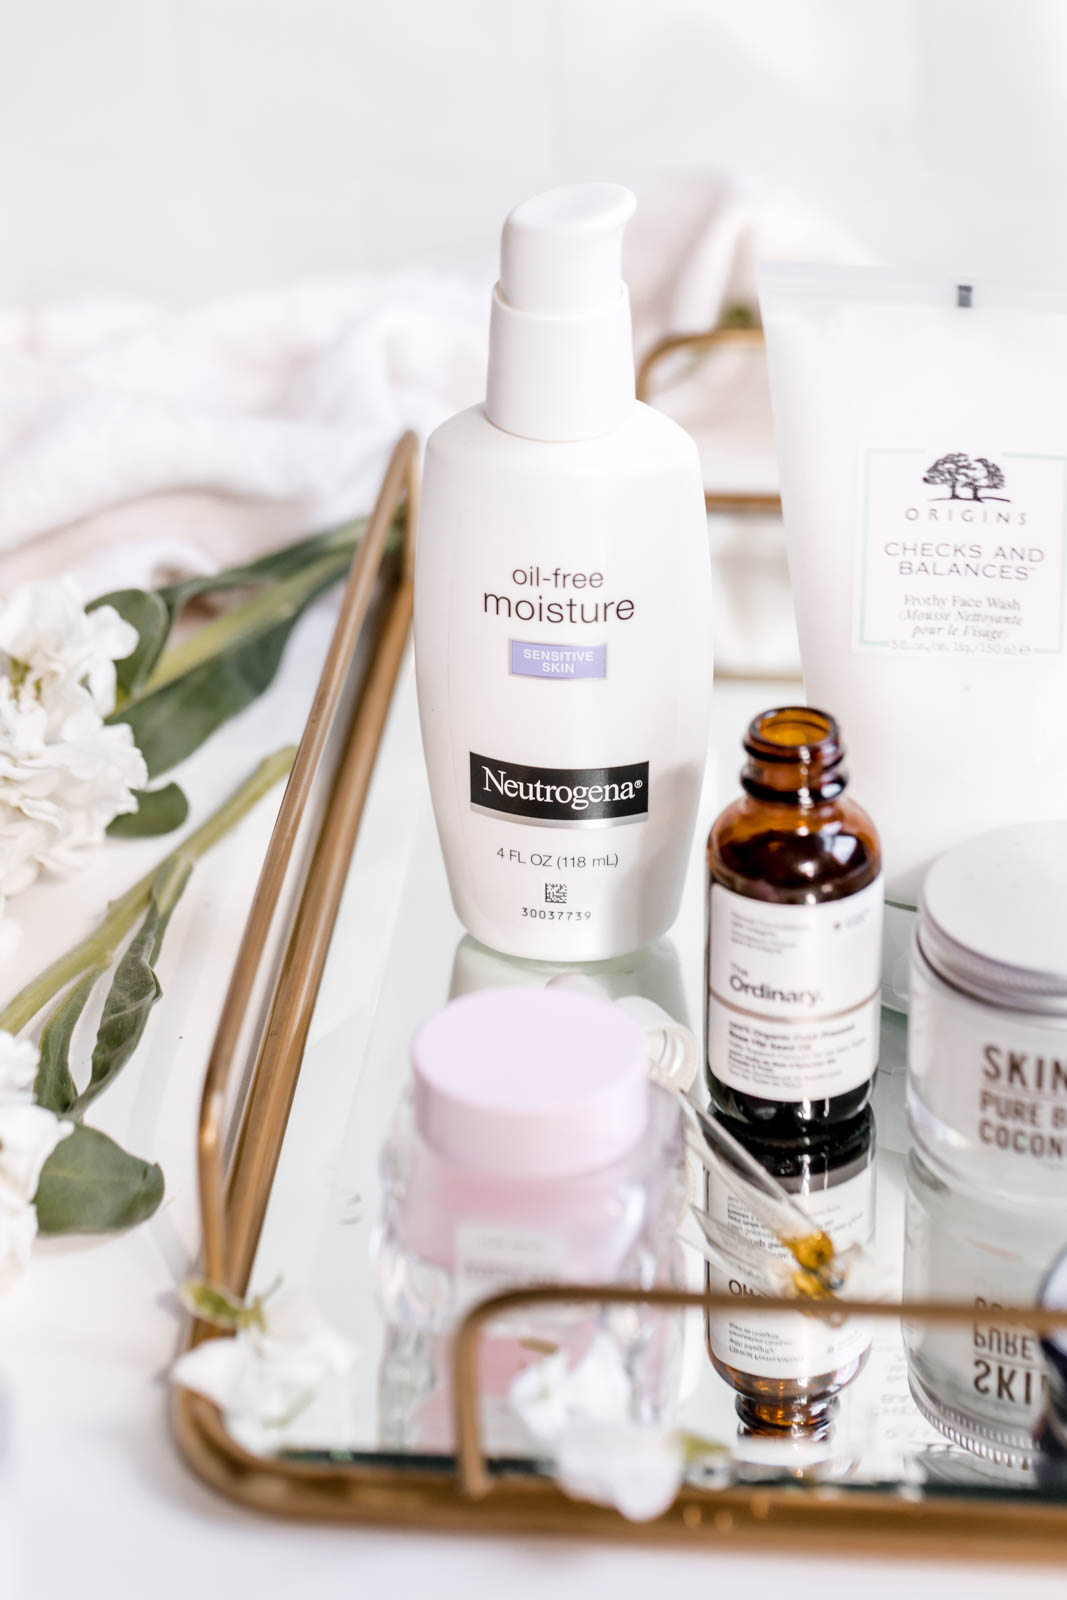 The Broke Girl's Guide to Skincare is filled with our top products to keep your skin looking and feeling great. Being broke doesn't mean you can't be fabulous